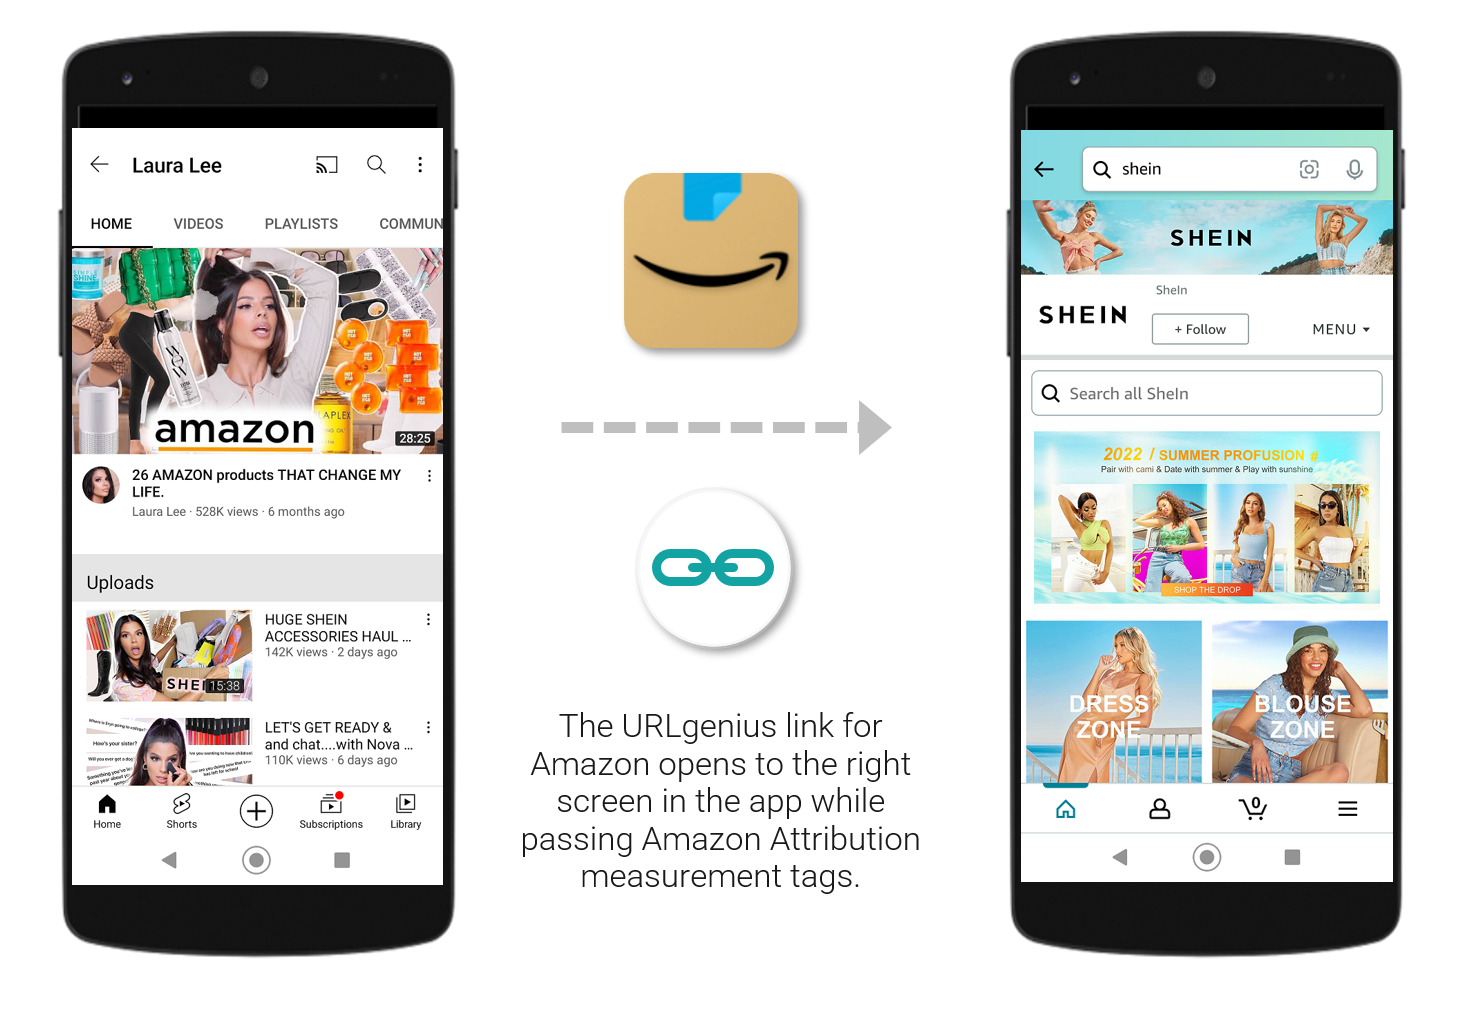 How YouTube Amazon Sellers, Influencers and Associates Can Link to Open the Amazon App vs. Website to Earn More with Attribution